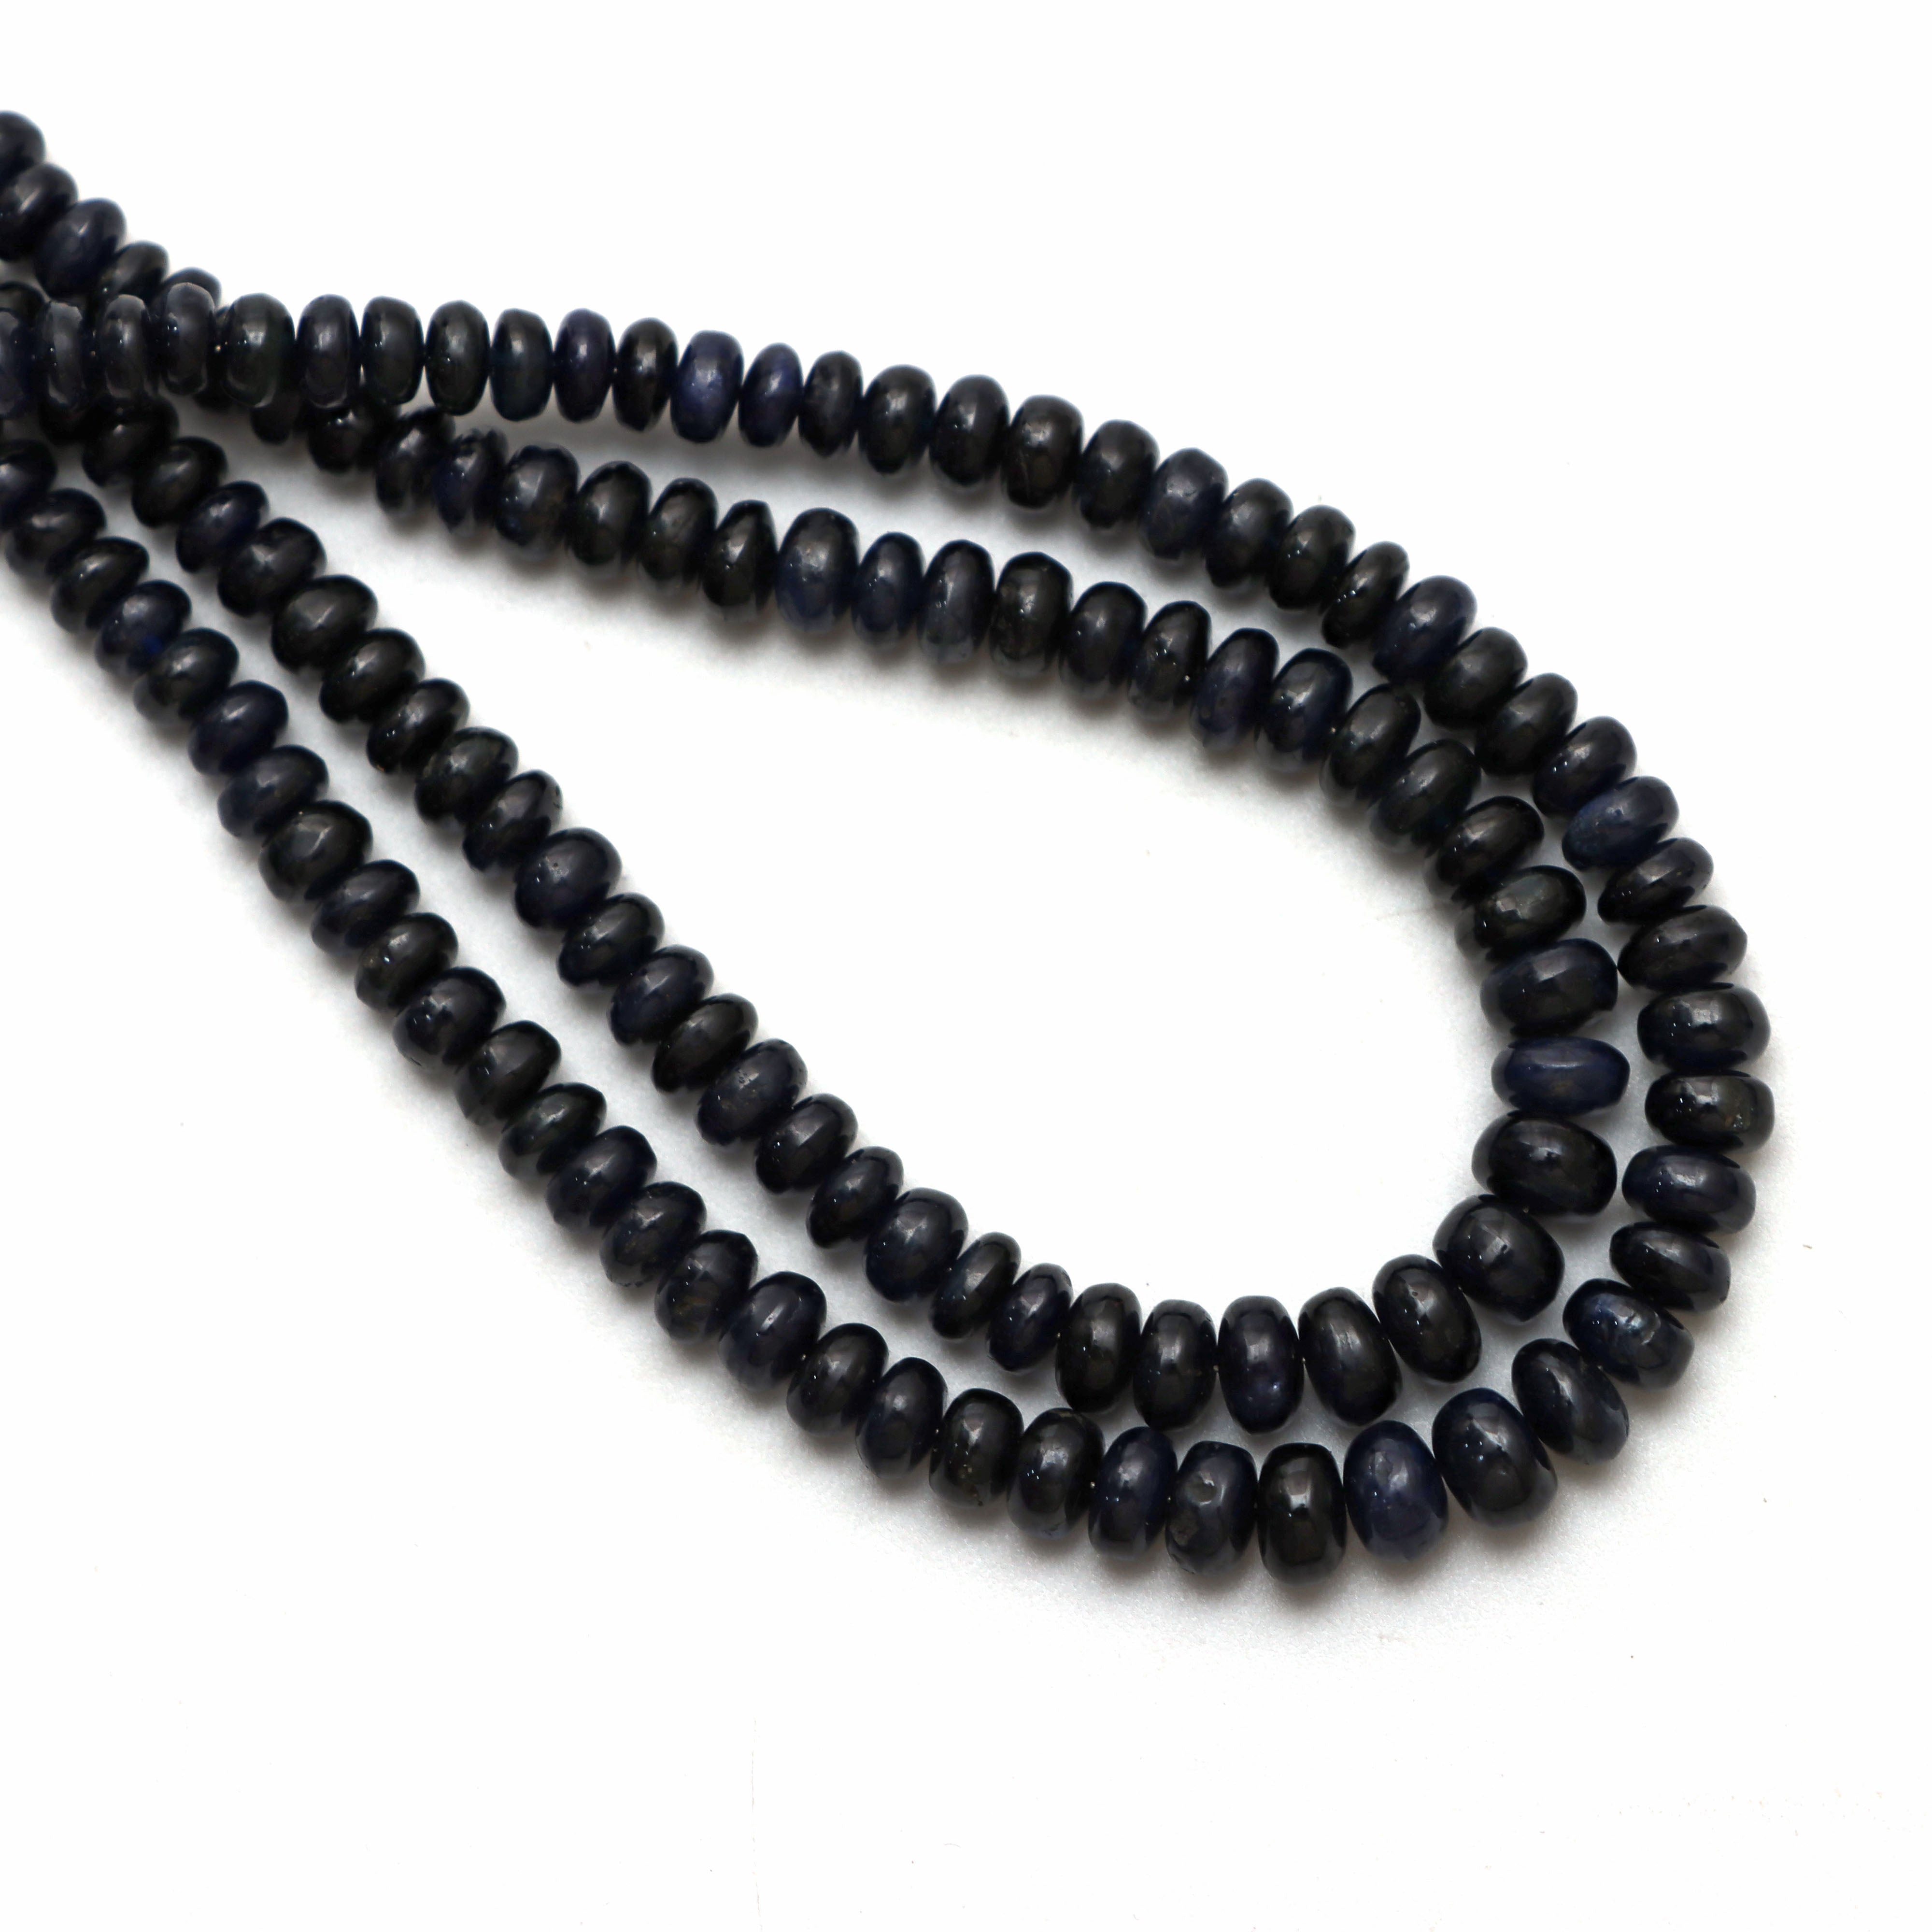 Exclusive AAA Quality Natural Blue Sapphire Beads Rondelle Faceted 3 to 4mm  Size Sold Per Strand of 8 inches Length, Precious Gemstone Beads